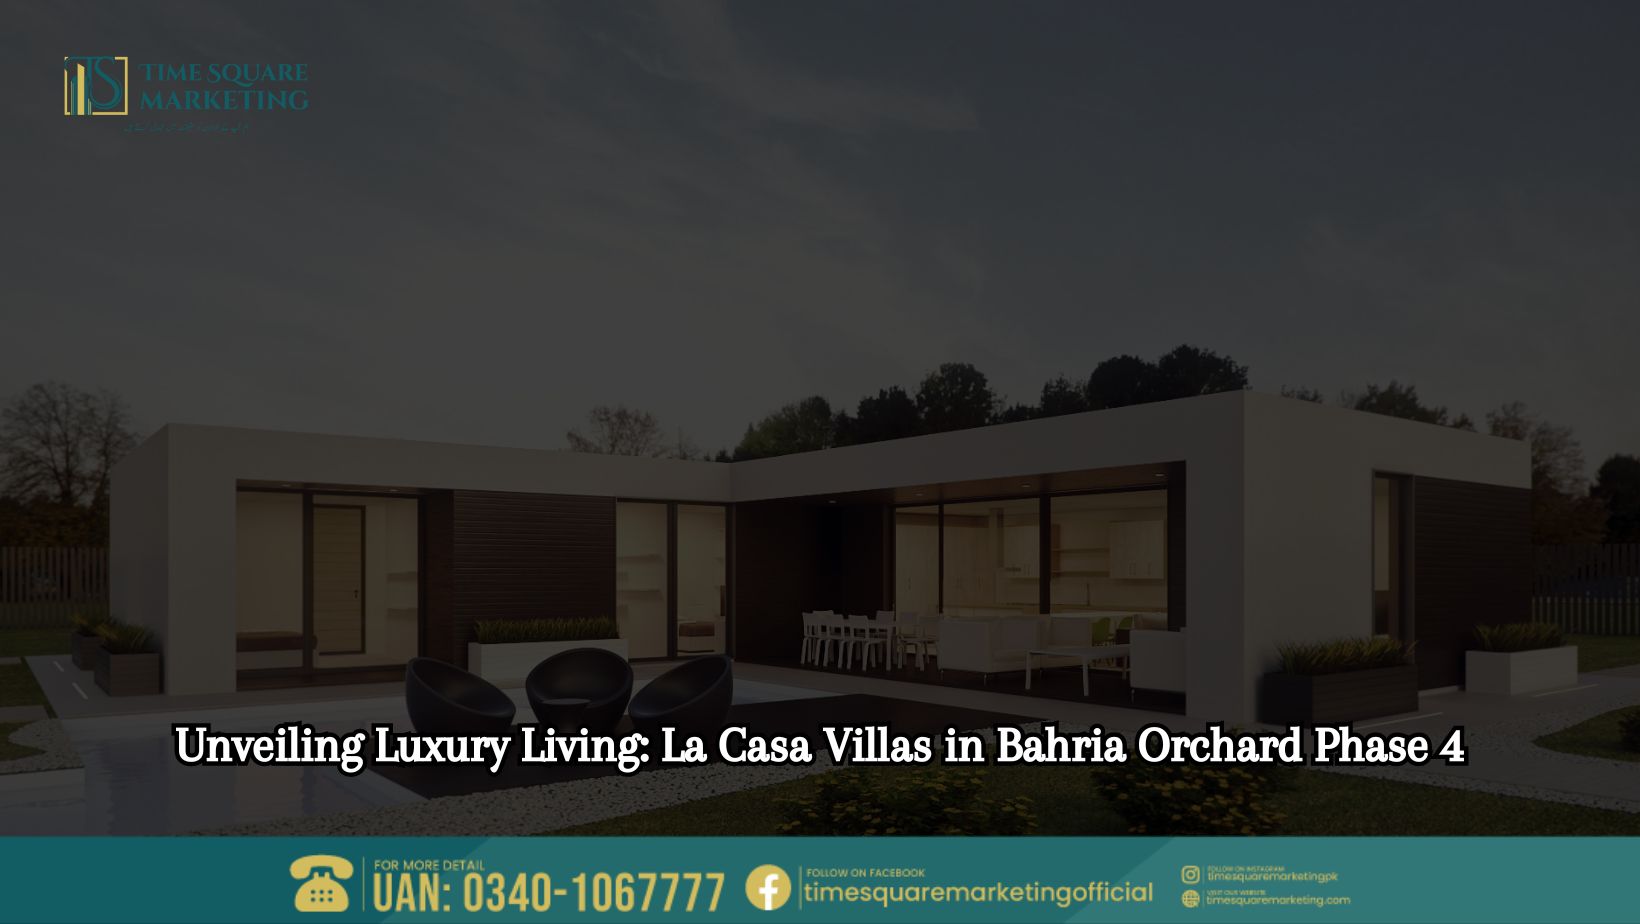 Unveiling Luxury Living La Casa Villas in Bahria Orchard Phase 4